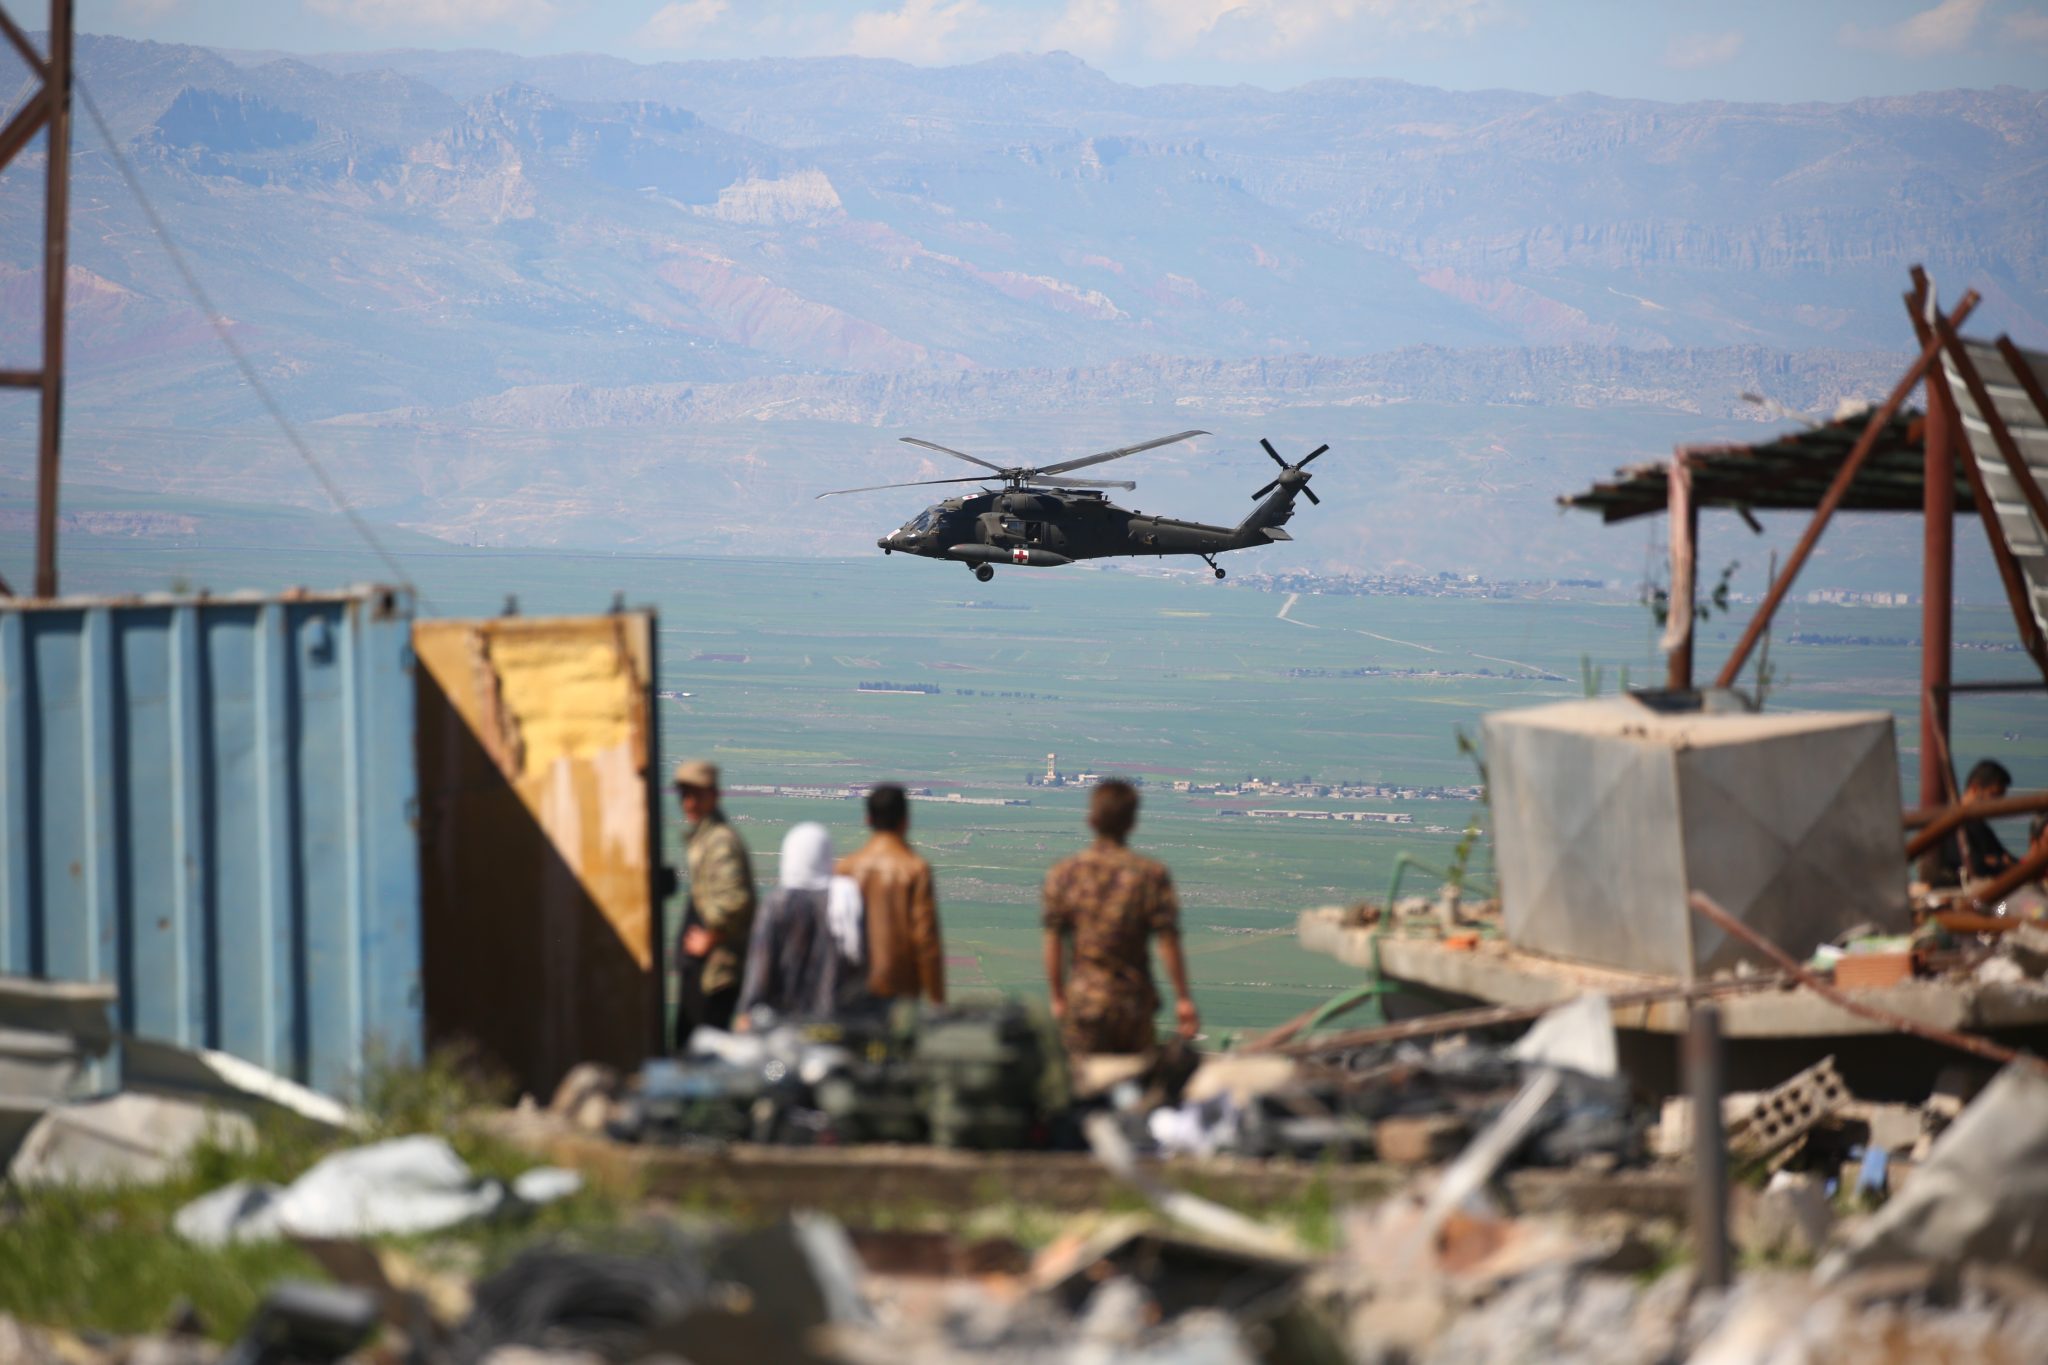 A medical helicopter, from the US-led coalition, flies over the site of Turkish airstrikes near northeastern Syrian Kurdish town of Derik, known as al-Malikiyah in Arabic, on April 25, 2017. Turkish warplanes killed more than 20 Kurdish fighters in strikes in Syria and Iraq, where the Kurds are key players in the battle against the Islamic State group. The bombardment near the city of Al-Malikiyah in northeastern Syria saw Turkish planes carry out "dozens of simultaneous air strikes" on YPG positions overnight, including a media centre, the Syrian Observatory for Human Rights said. / AFP PHOTO / DELIL SOULEIMAN